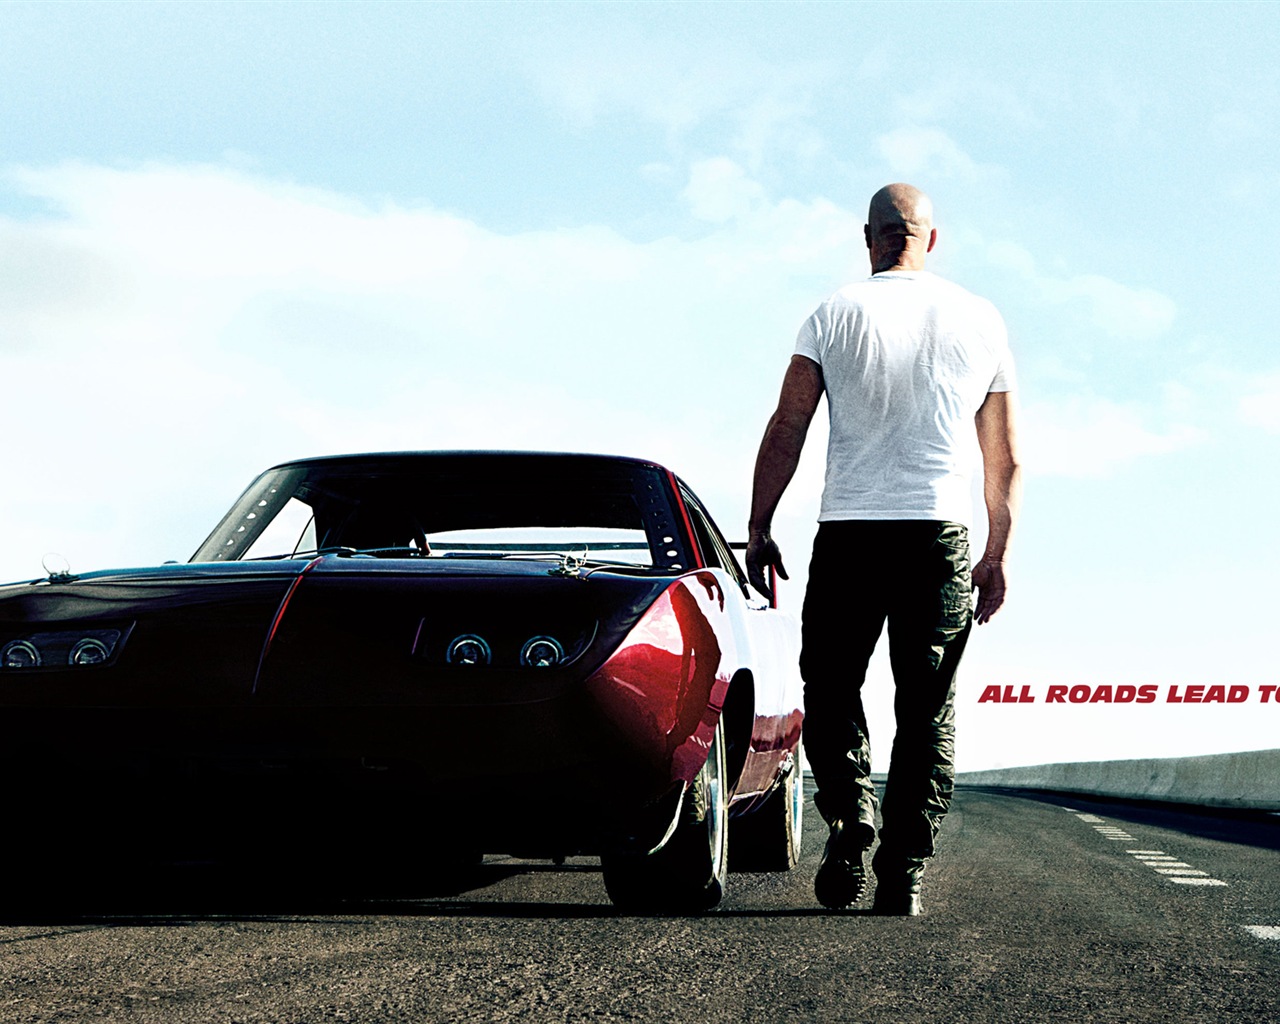 Fast And Furious 6 HD movie wallpapers #11 - 1280x1024